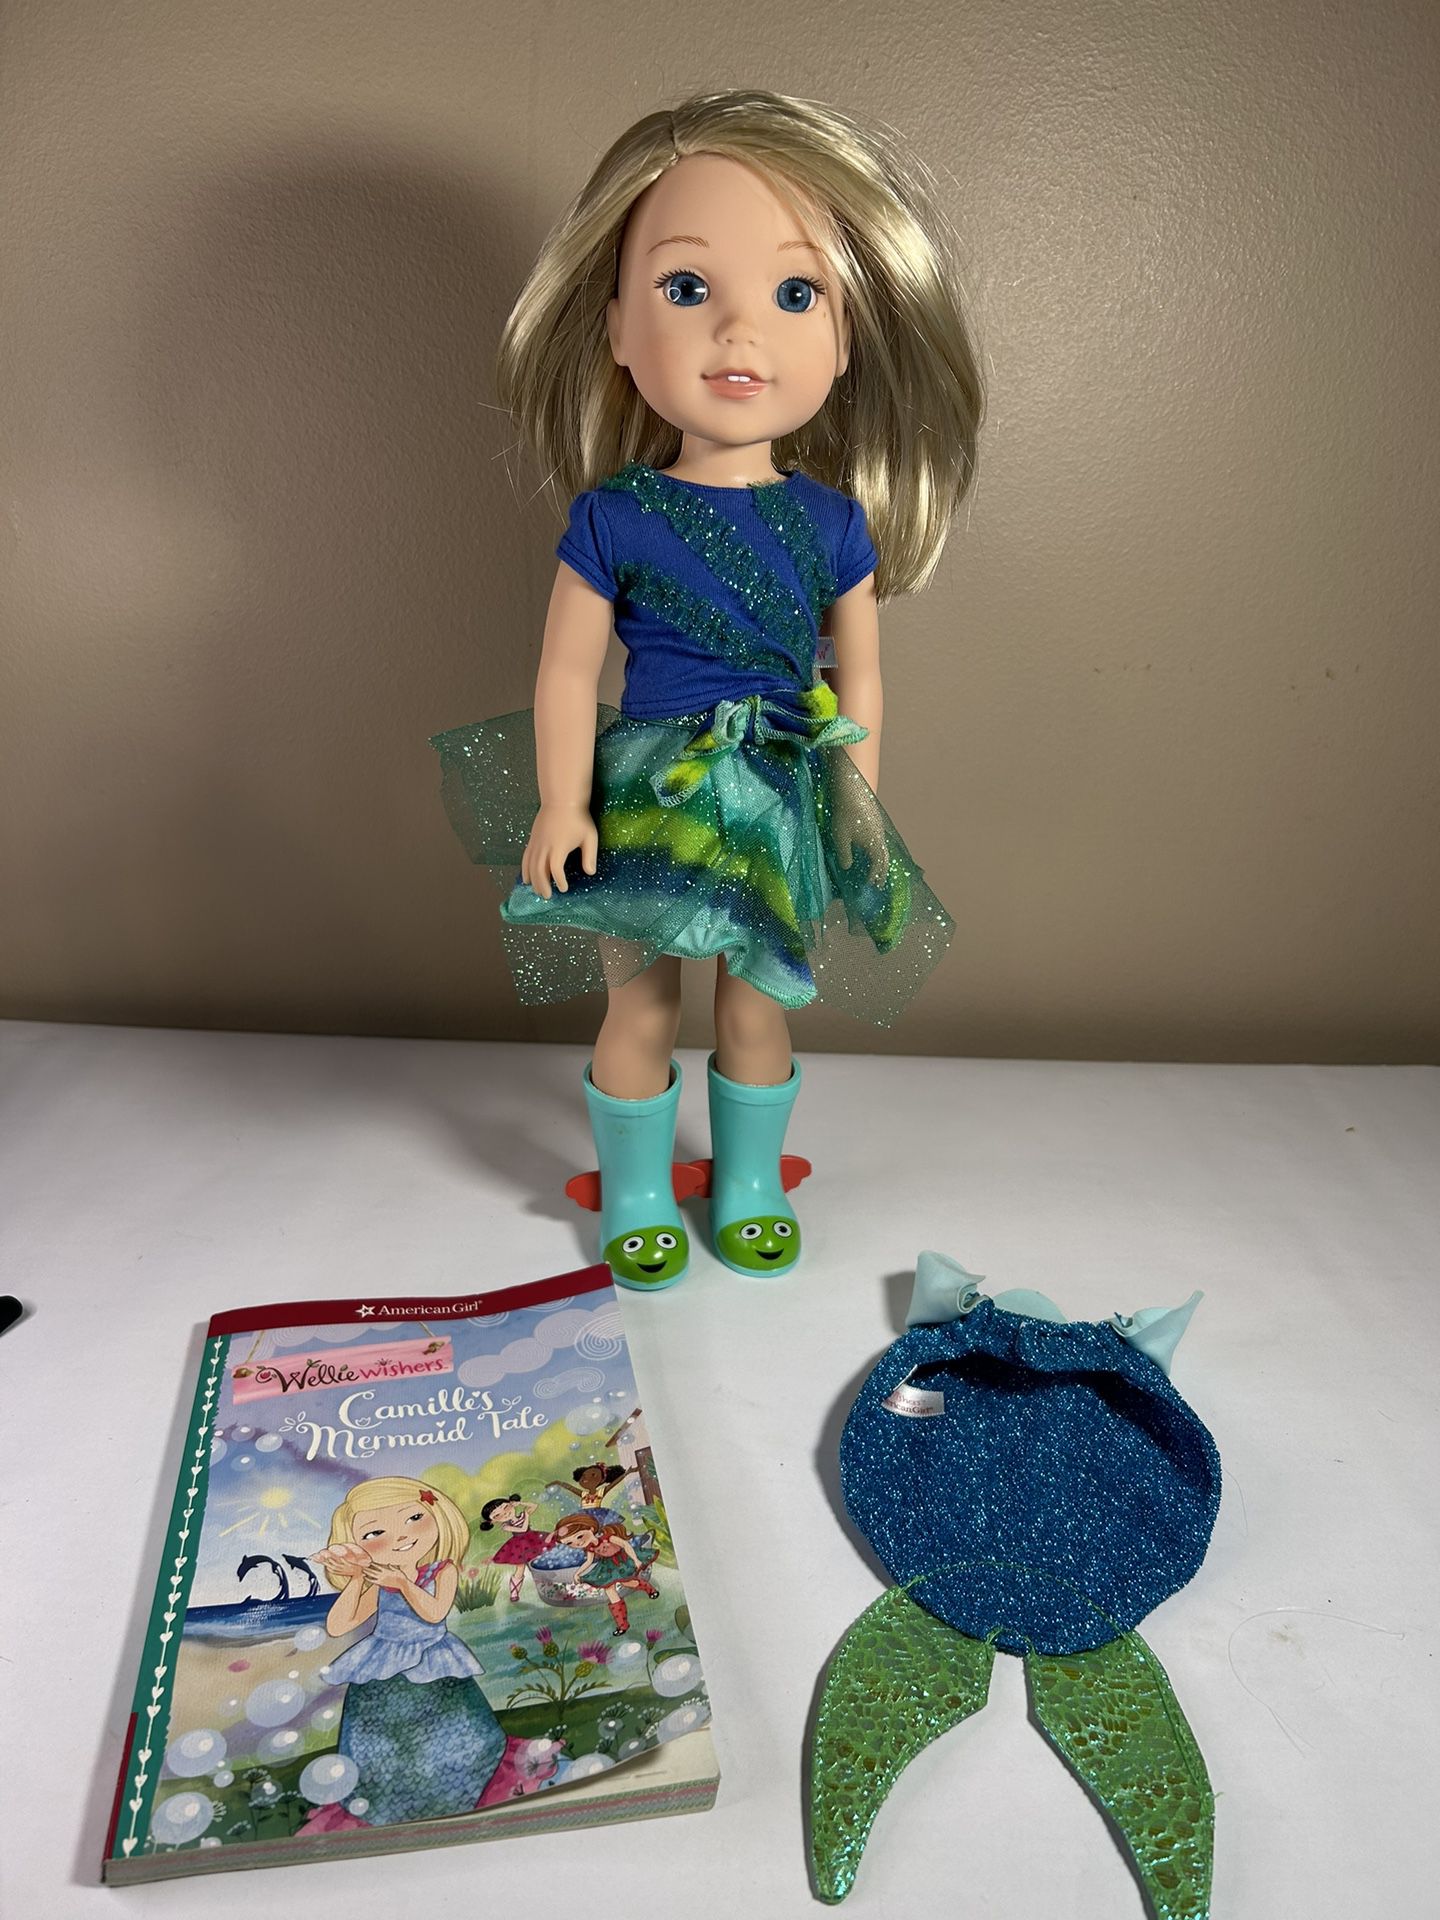 American Girl Play Doll Wellie Wishers Camille Doll Pre-Owned FGD40 1737PY Book